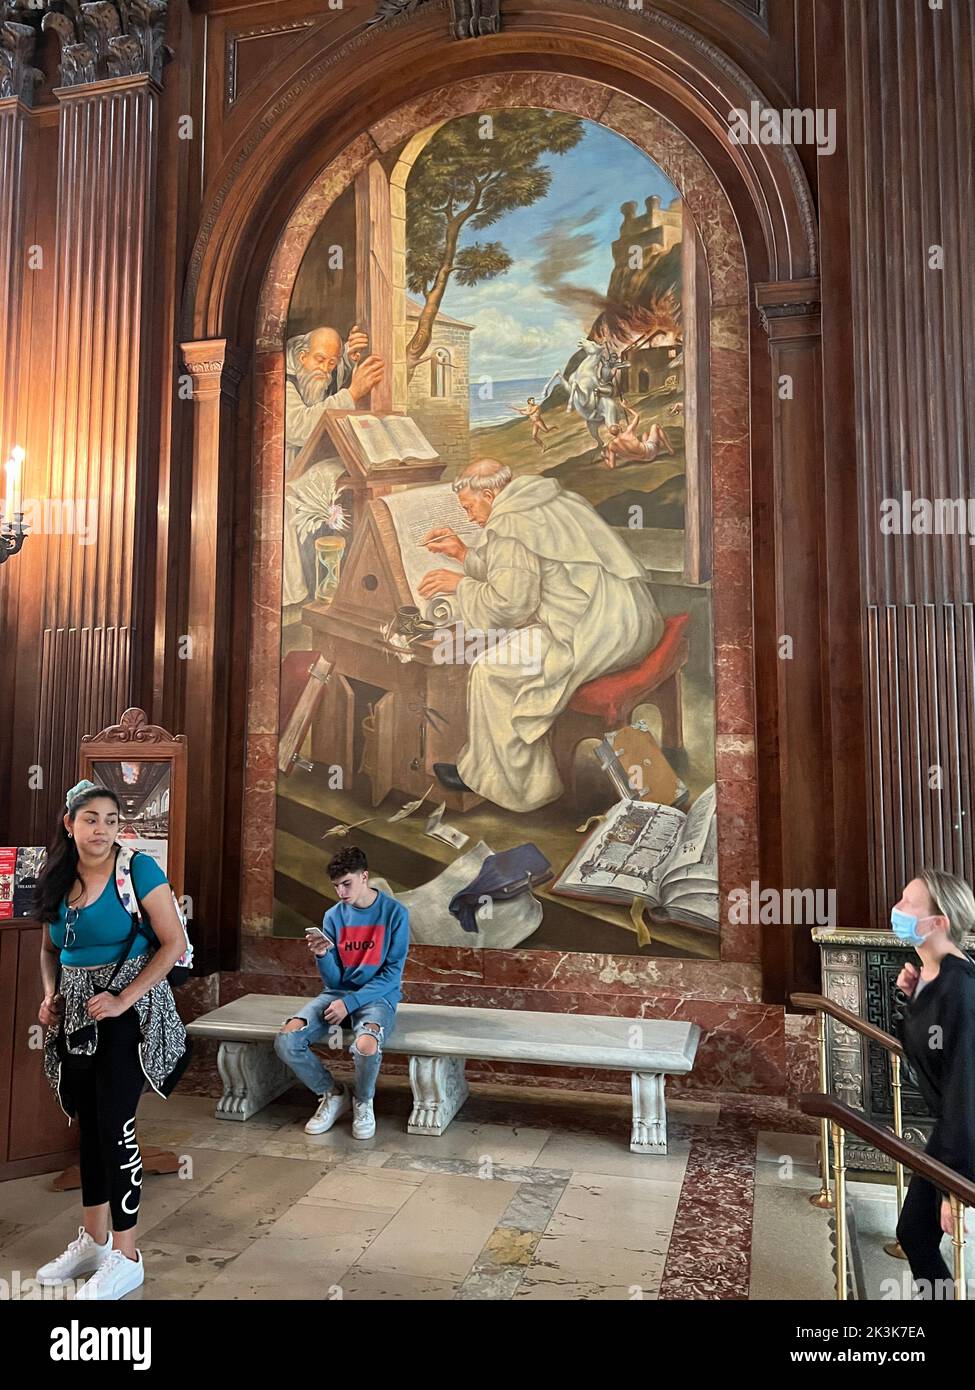 'THE MEDIEVAL SCRIBE'.  The McGraw Rotunda of the 5th Ave. New York Public Library building contains a set of WPA murals: 'It features The Story of the Recorded Word, a set of four large arched panels by Edward Laning, 1938-1942. Stock Photo